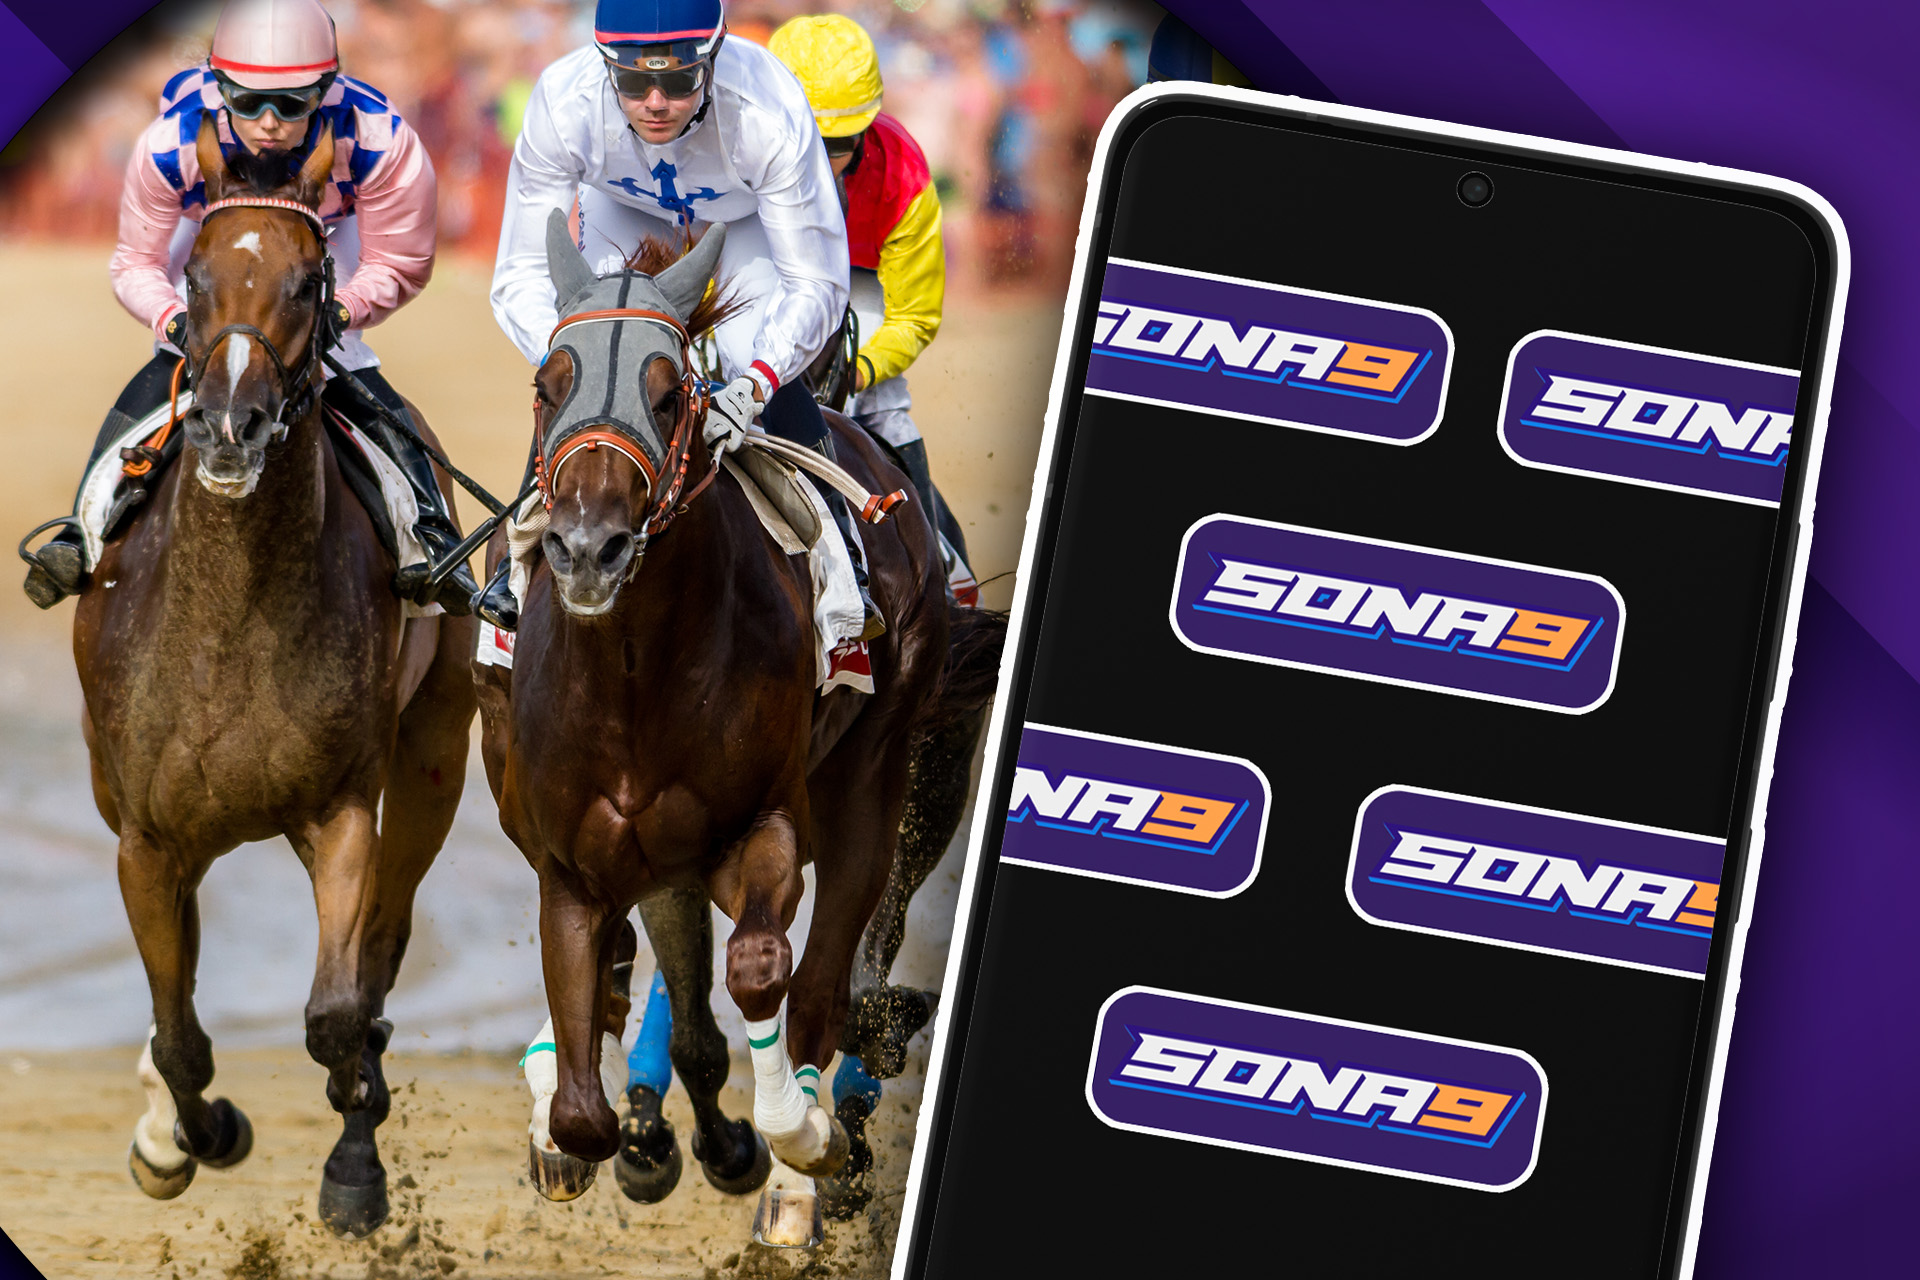 Download the Sona9 app and bet on horse racing via your smartphone.